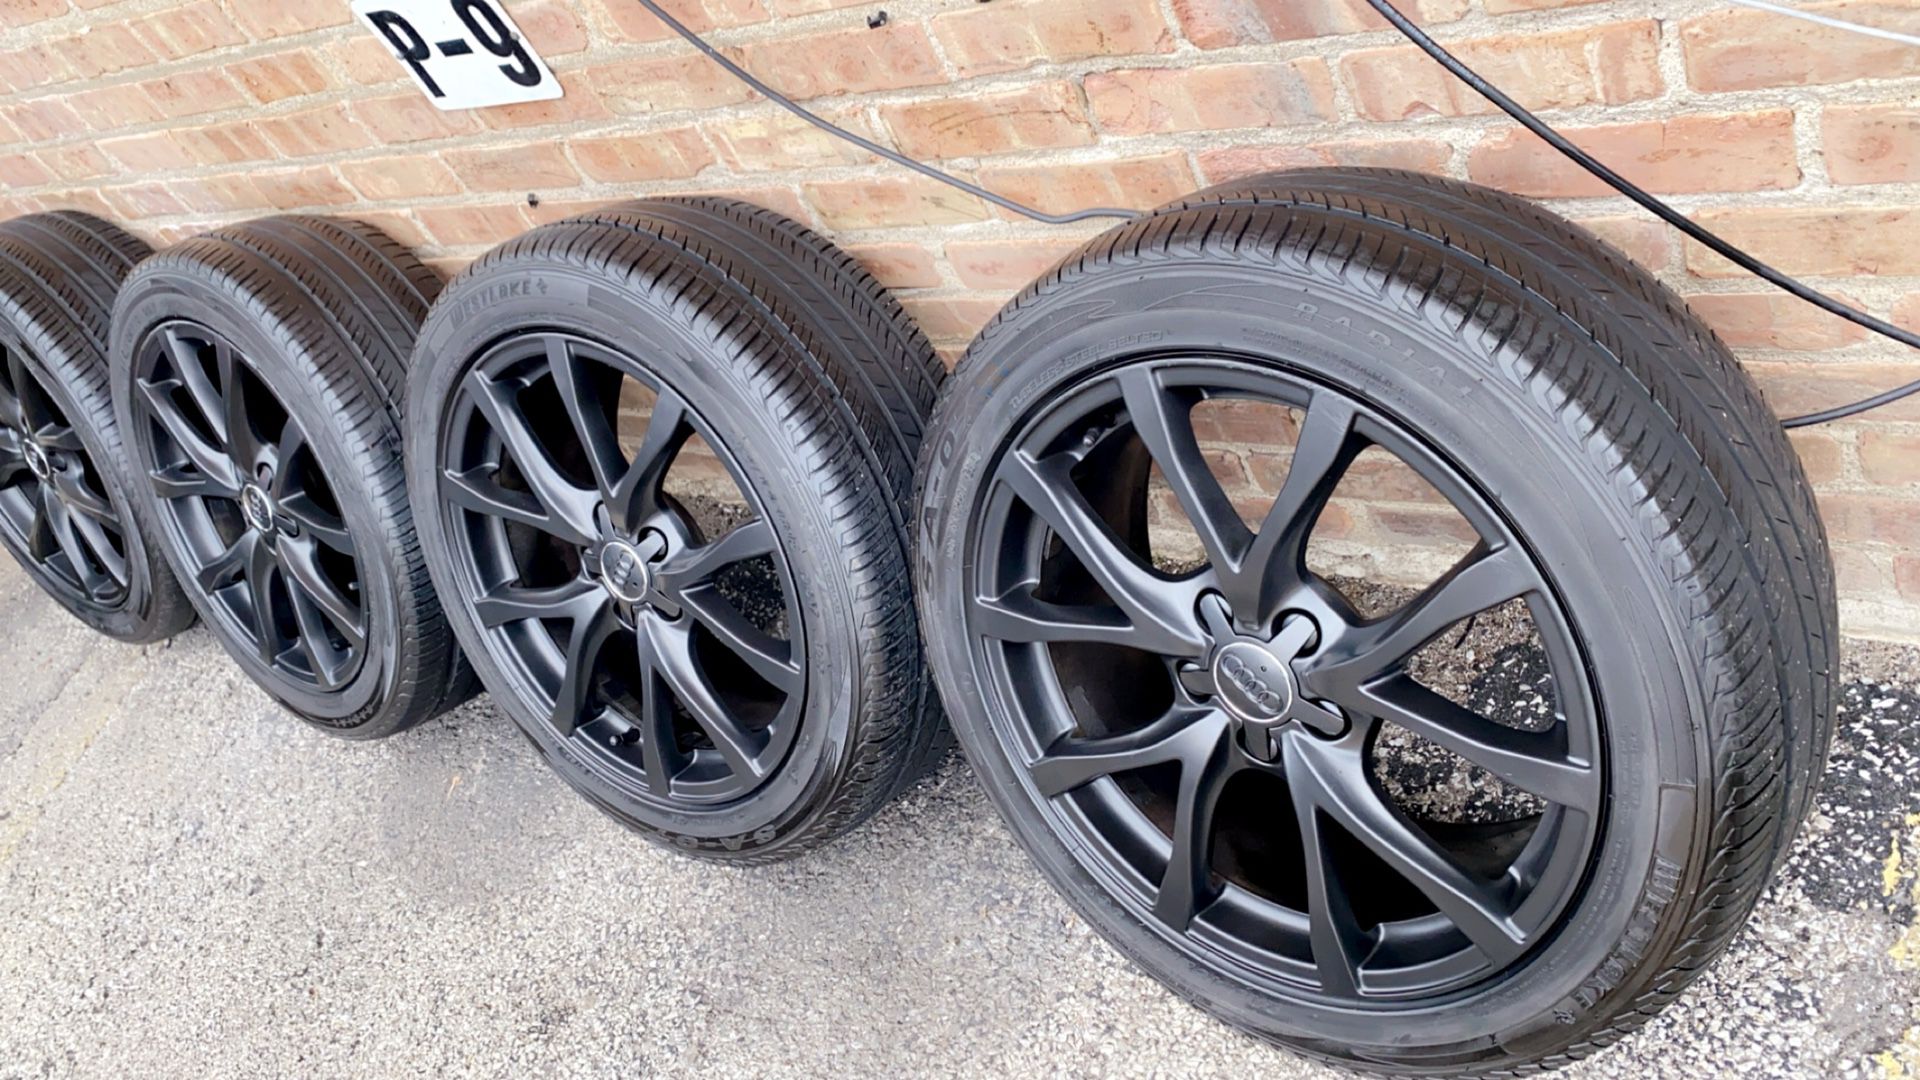 18” Audi Rims And Tires Sensors Included 